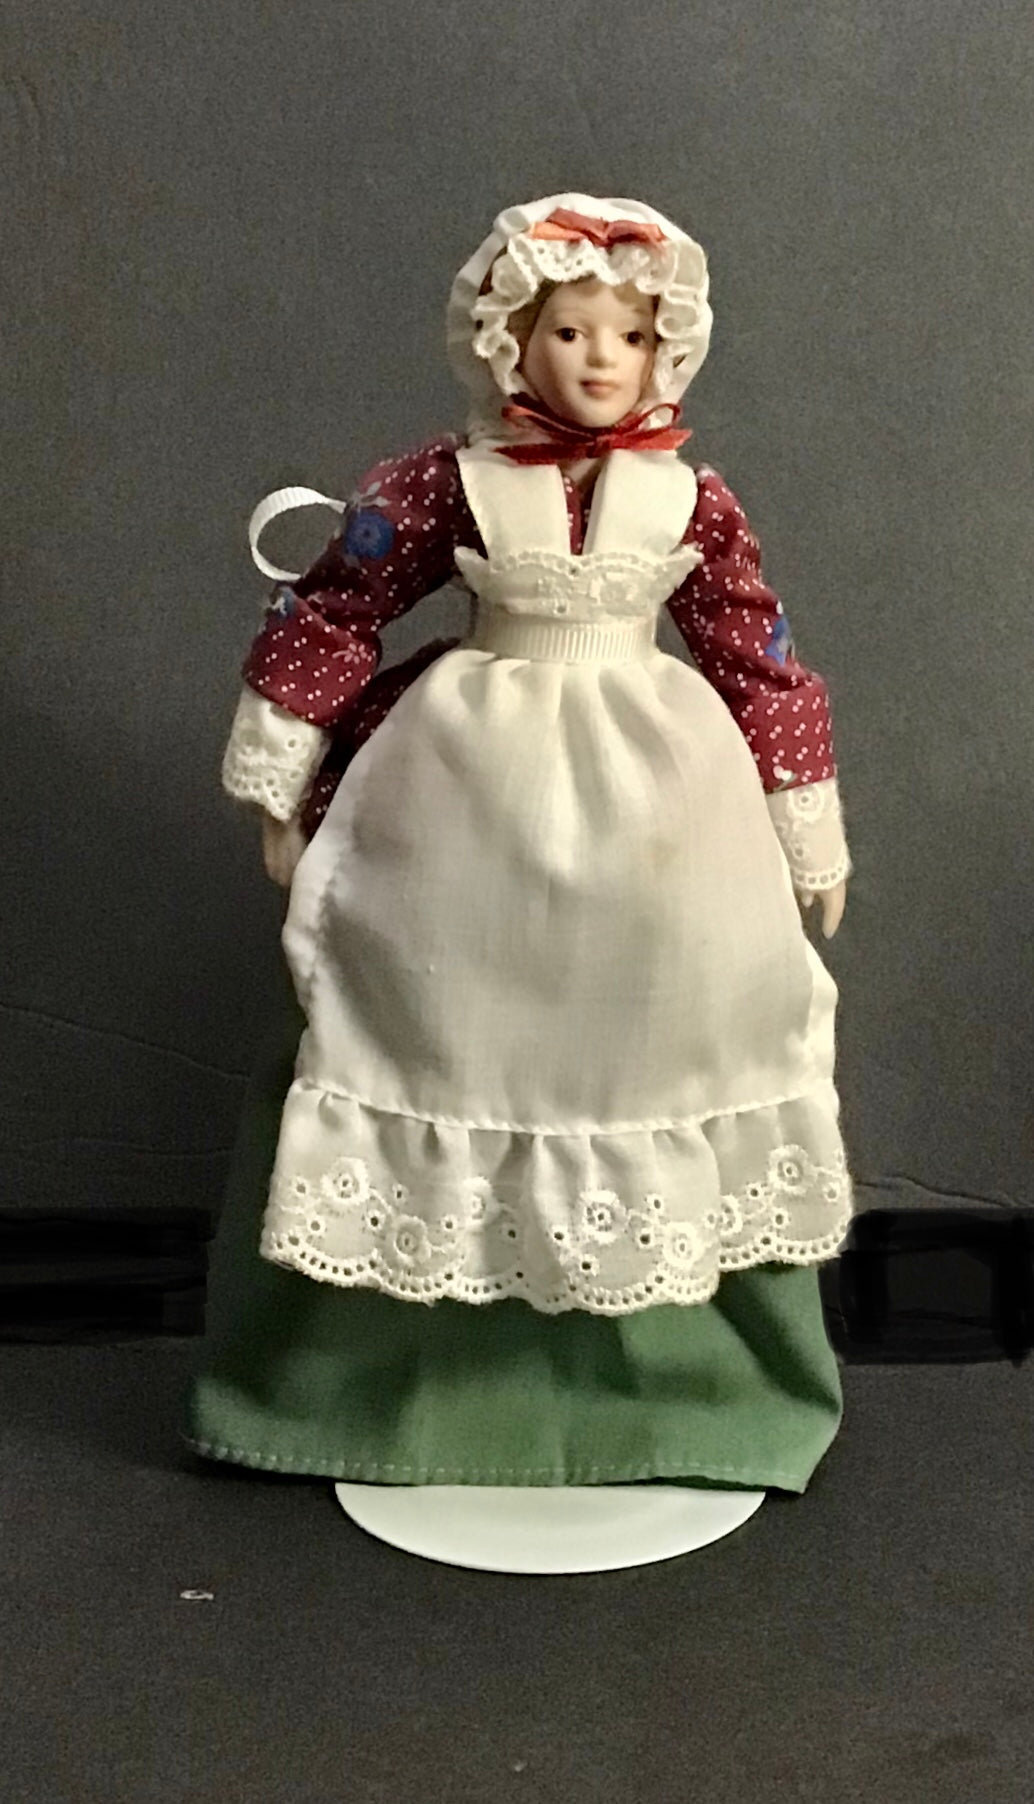 1987 Vintage Porcelain Doll From Avon Fashion of American Times.